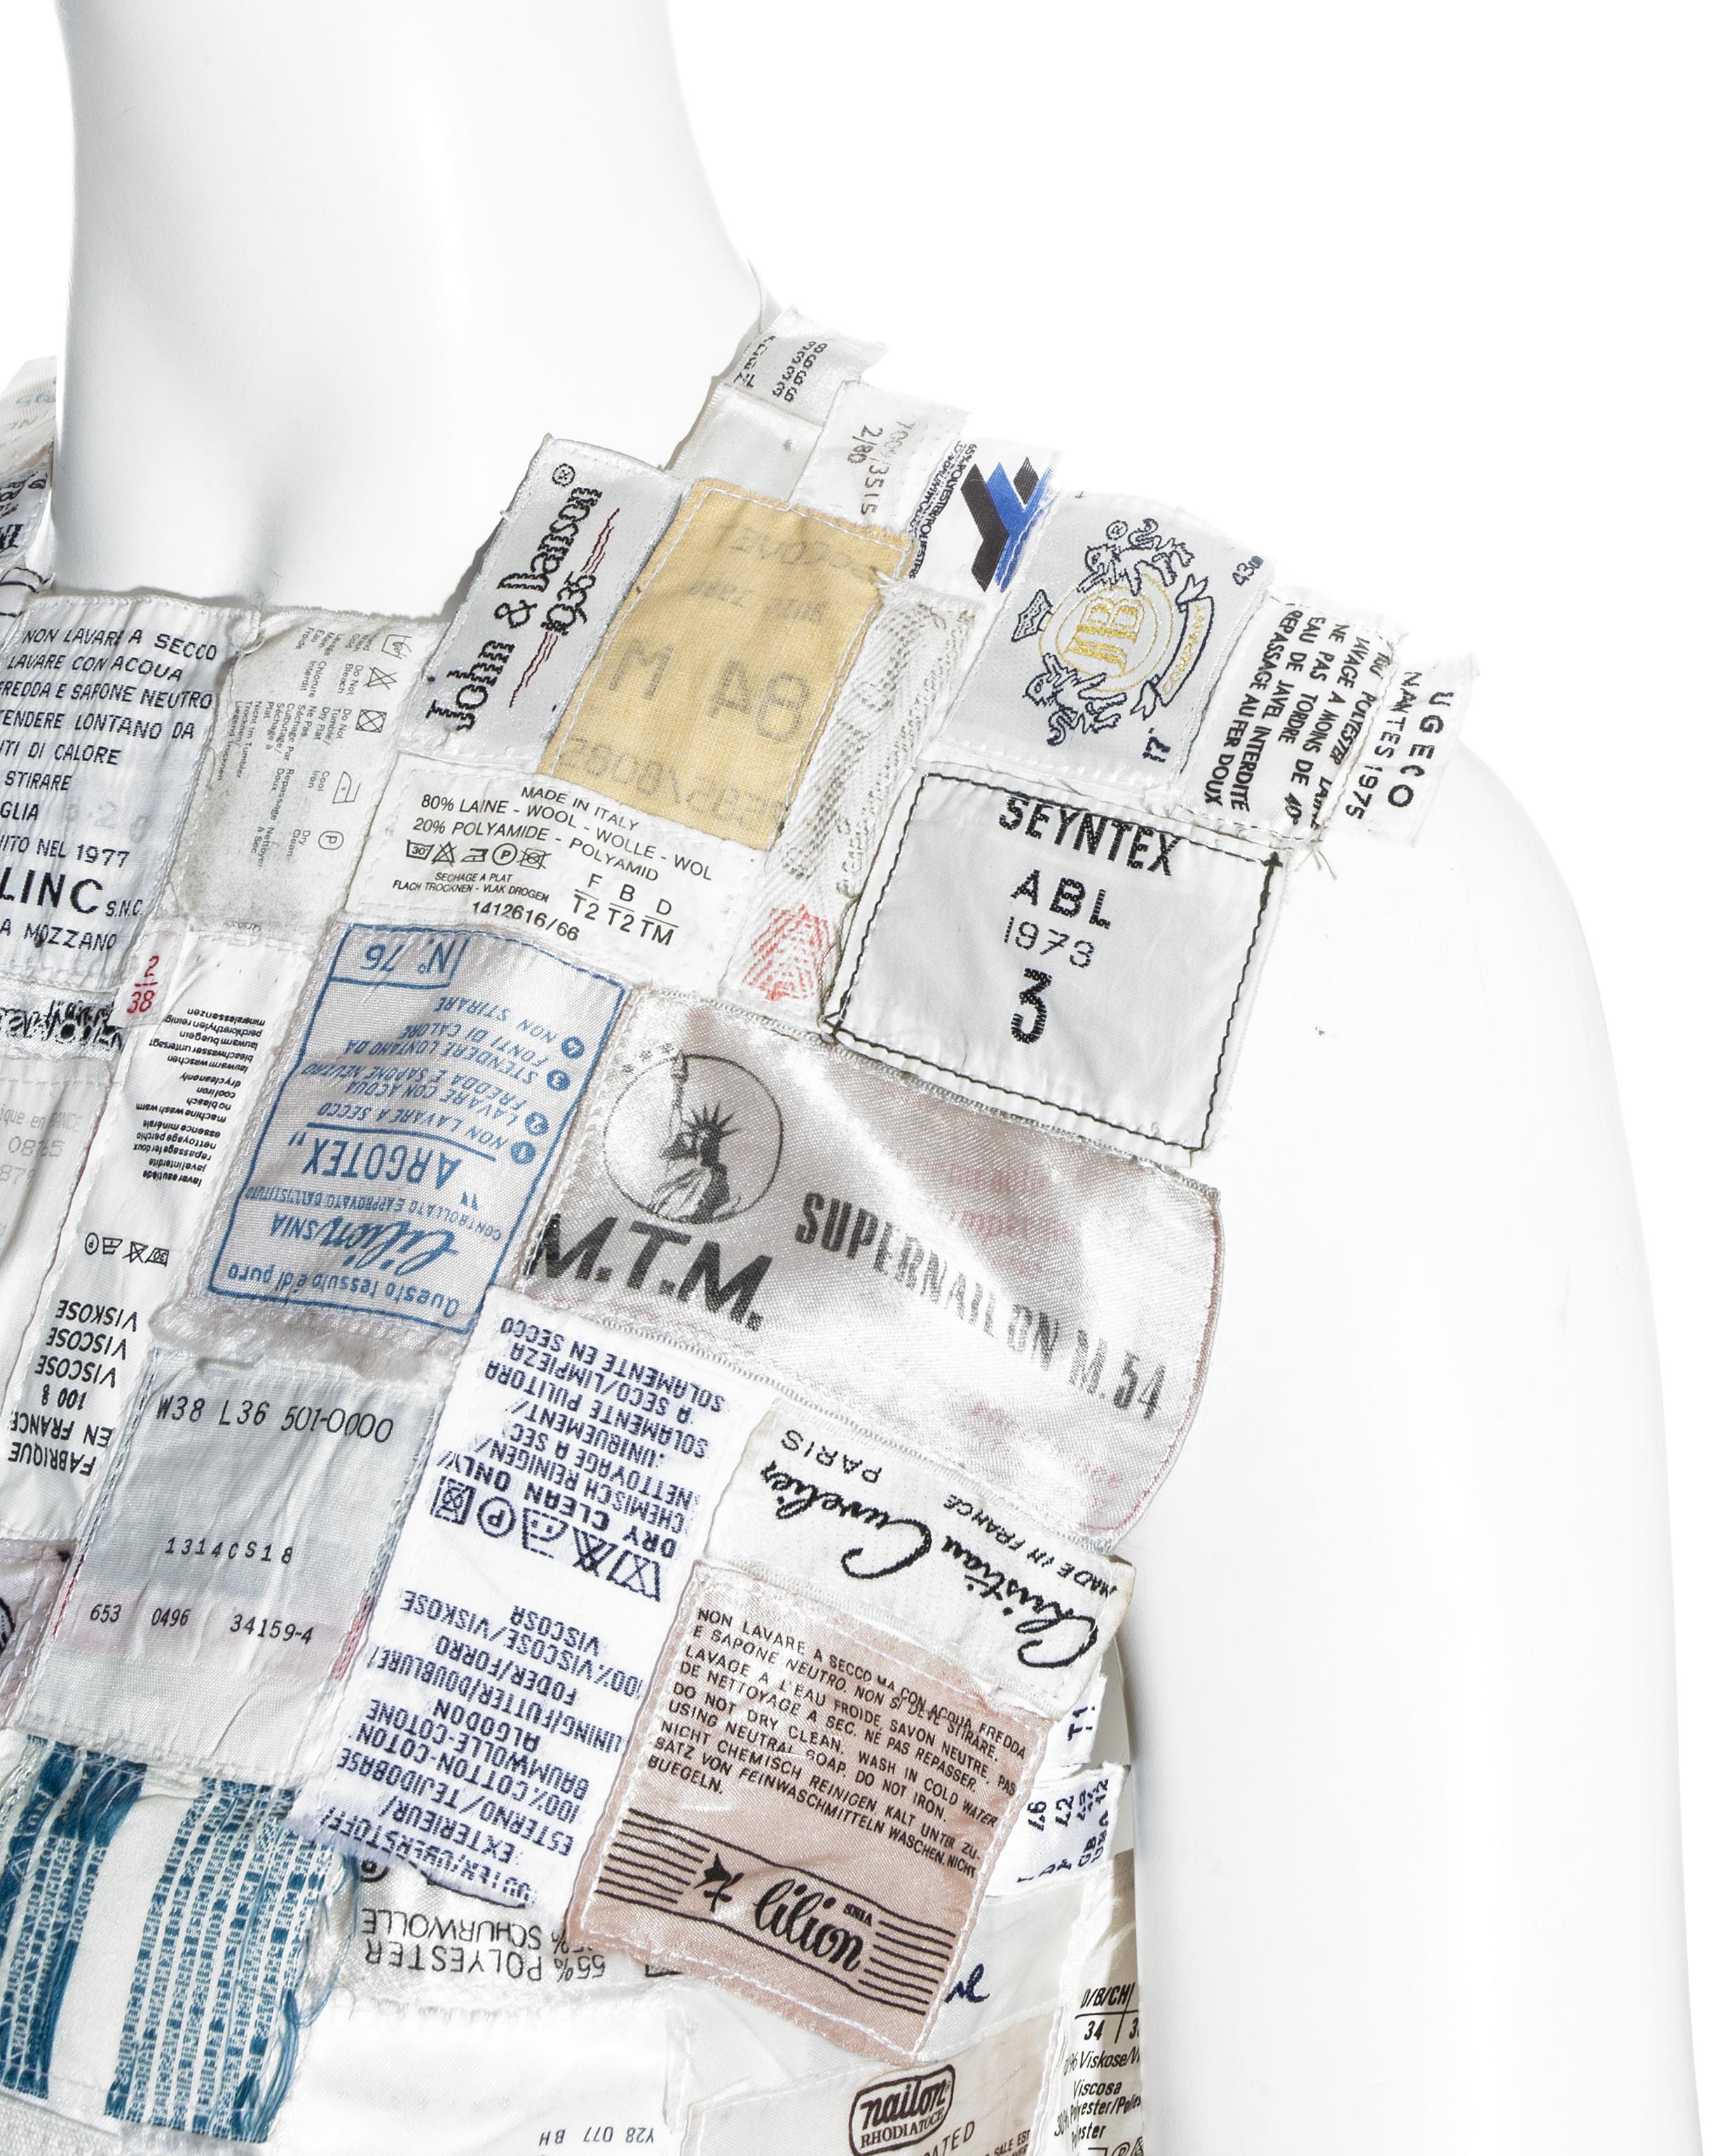 Women's Martin Margiela shirtfront made up of reclaimed vintage labels, ss 2001